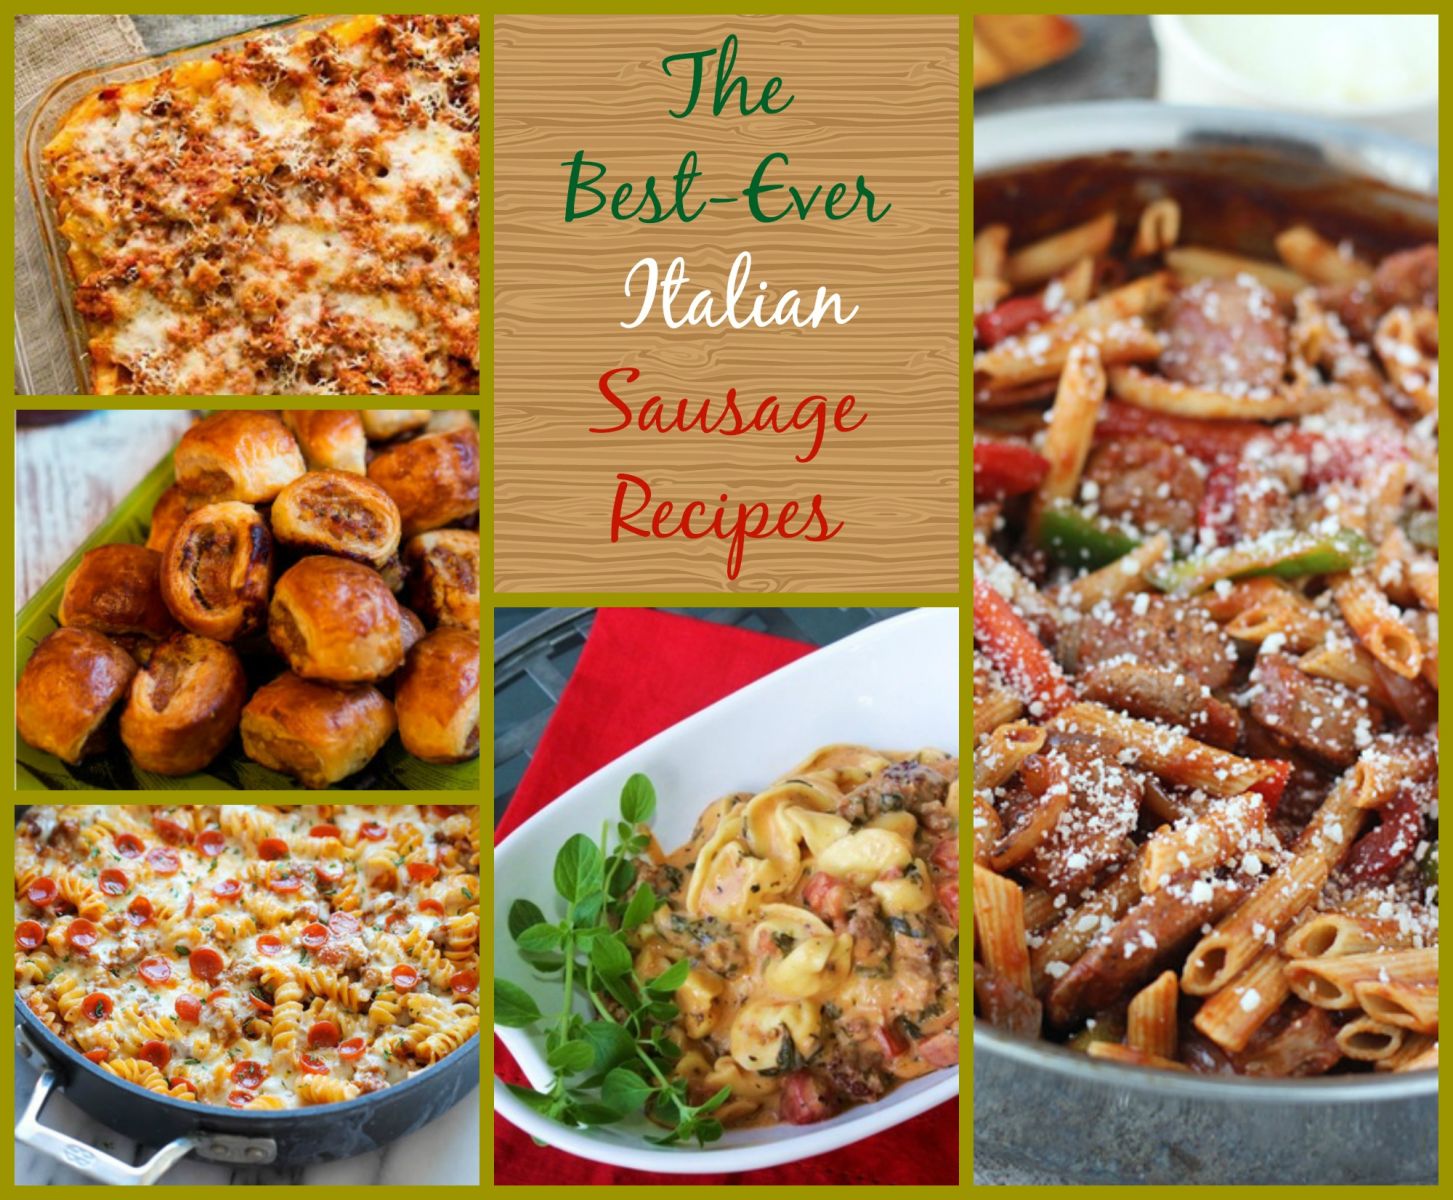 The Best-Ever Italian Sausage Recipes